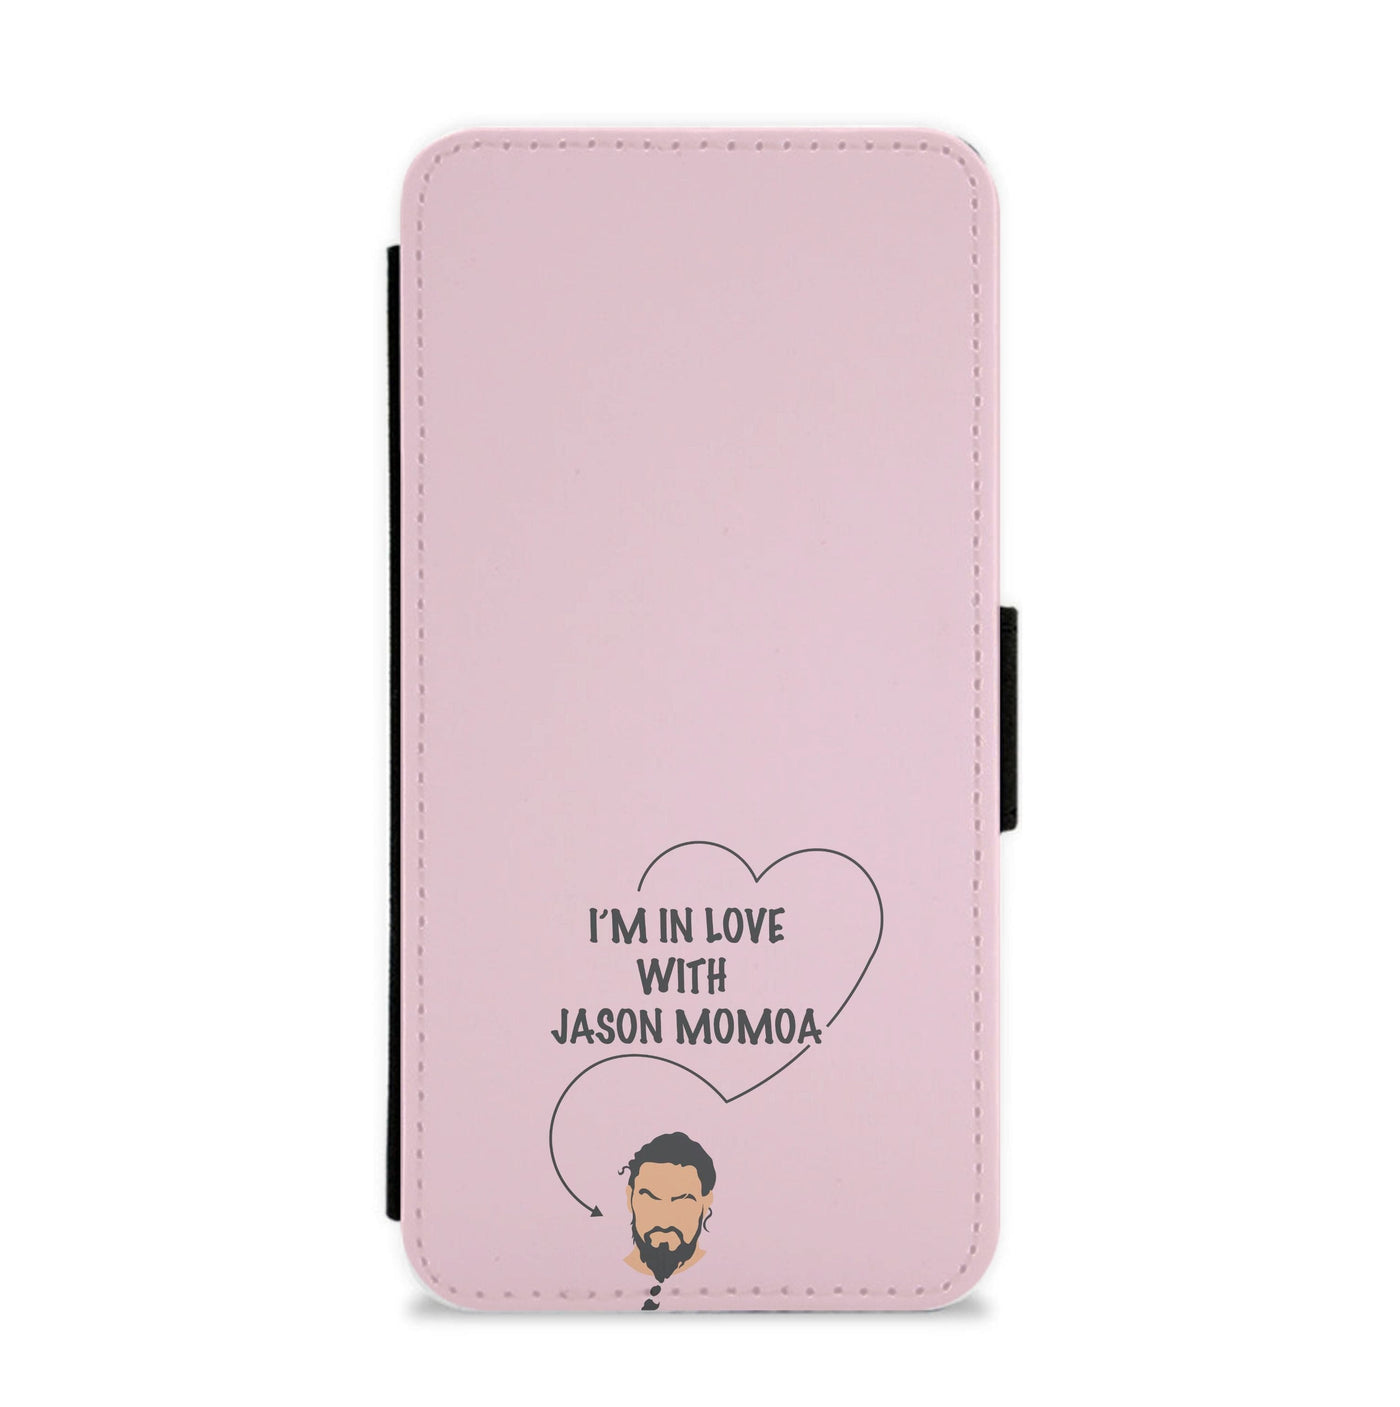 I'm In Love With Jason Momoa - Game Of Thrones Flip / Wallet Phone Case